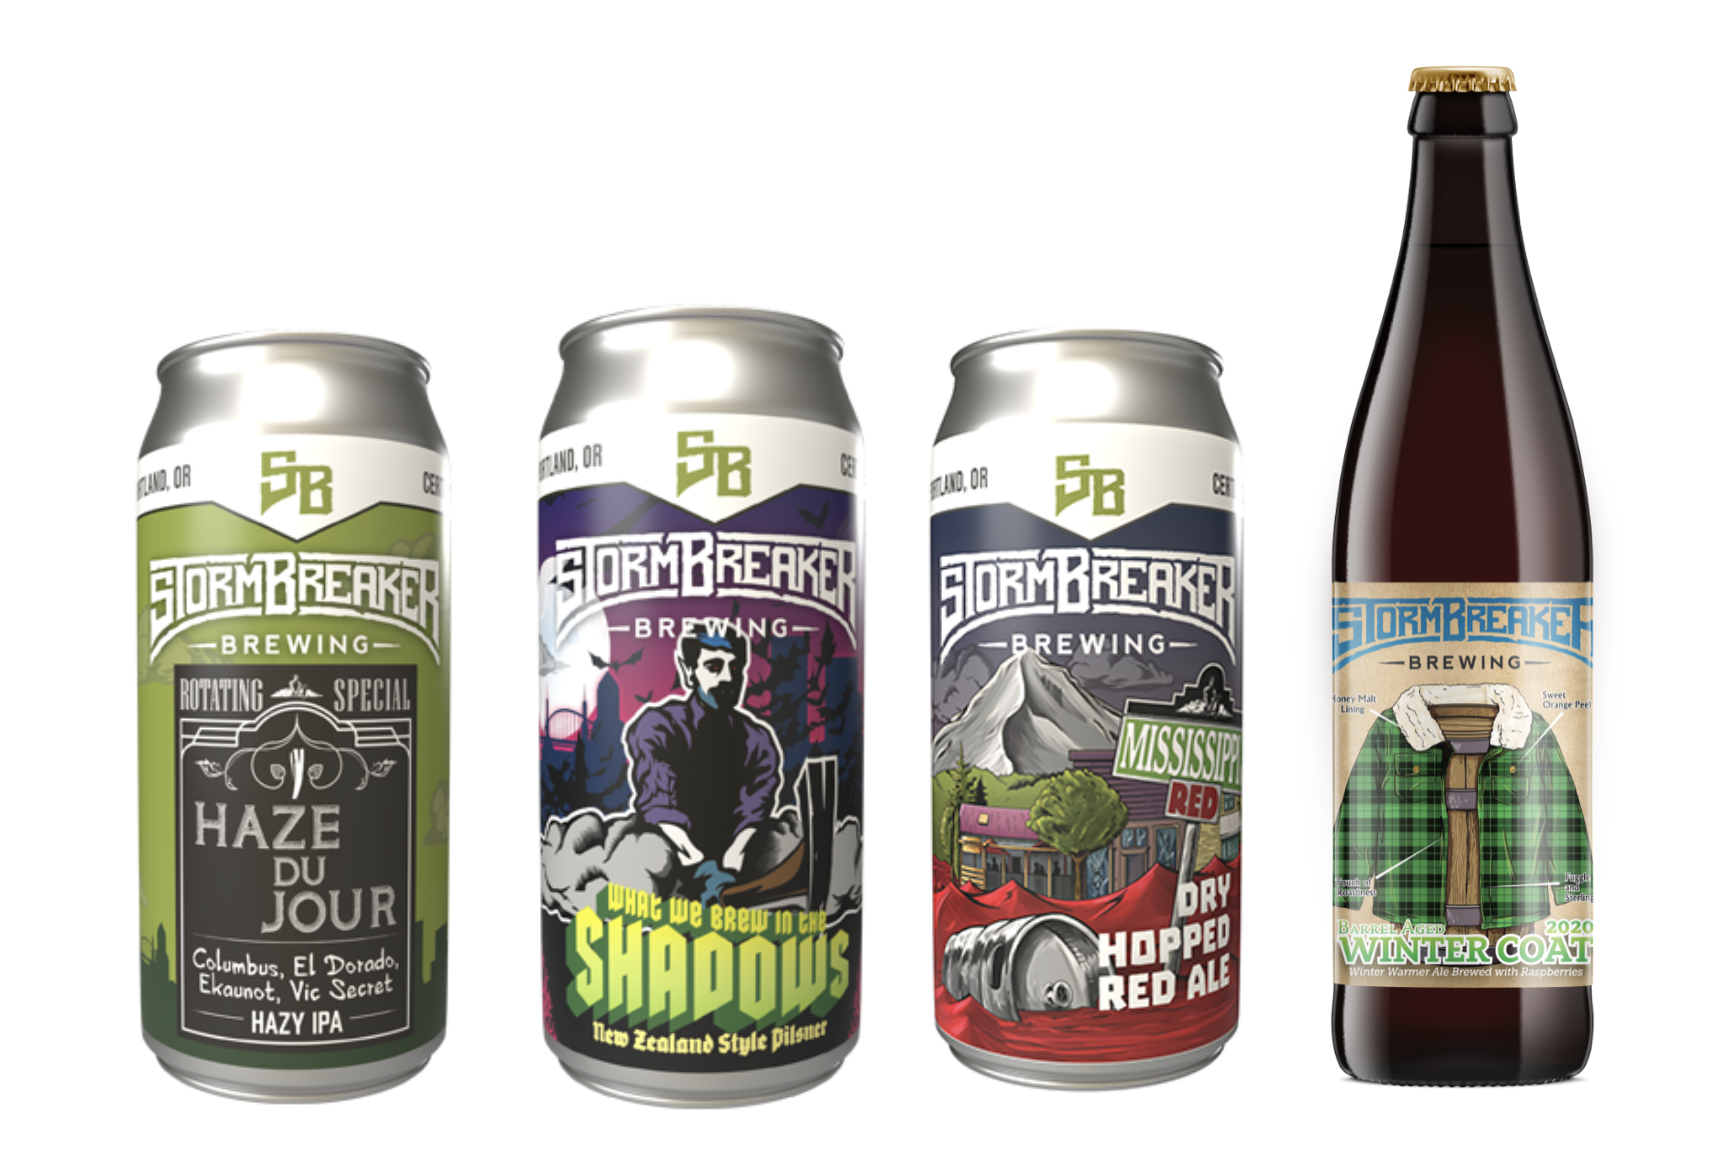 StormBreaker Brewing Releases Haze du Jour, What We Brew in the Shadows, Mississippi Red, and Barrel Aged Winter Coat 2020